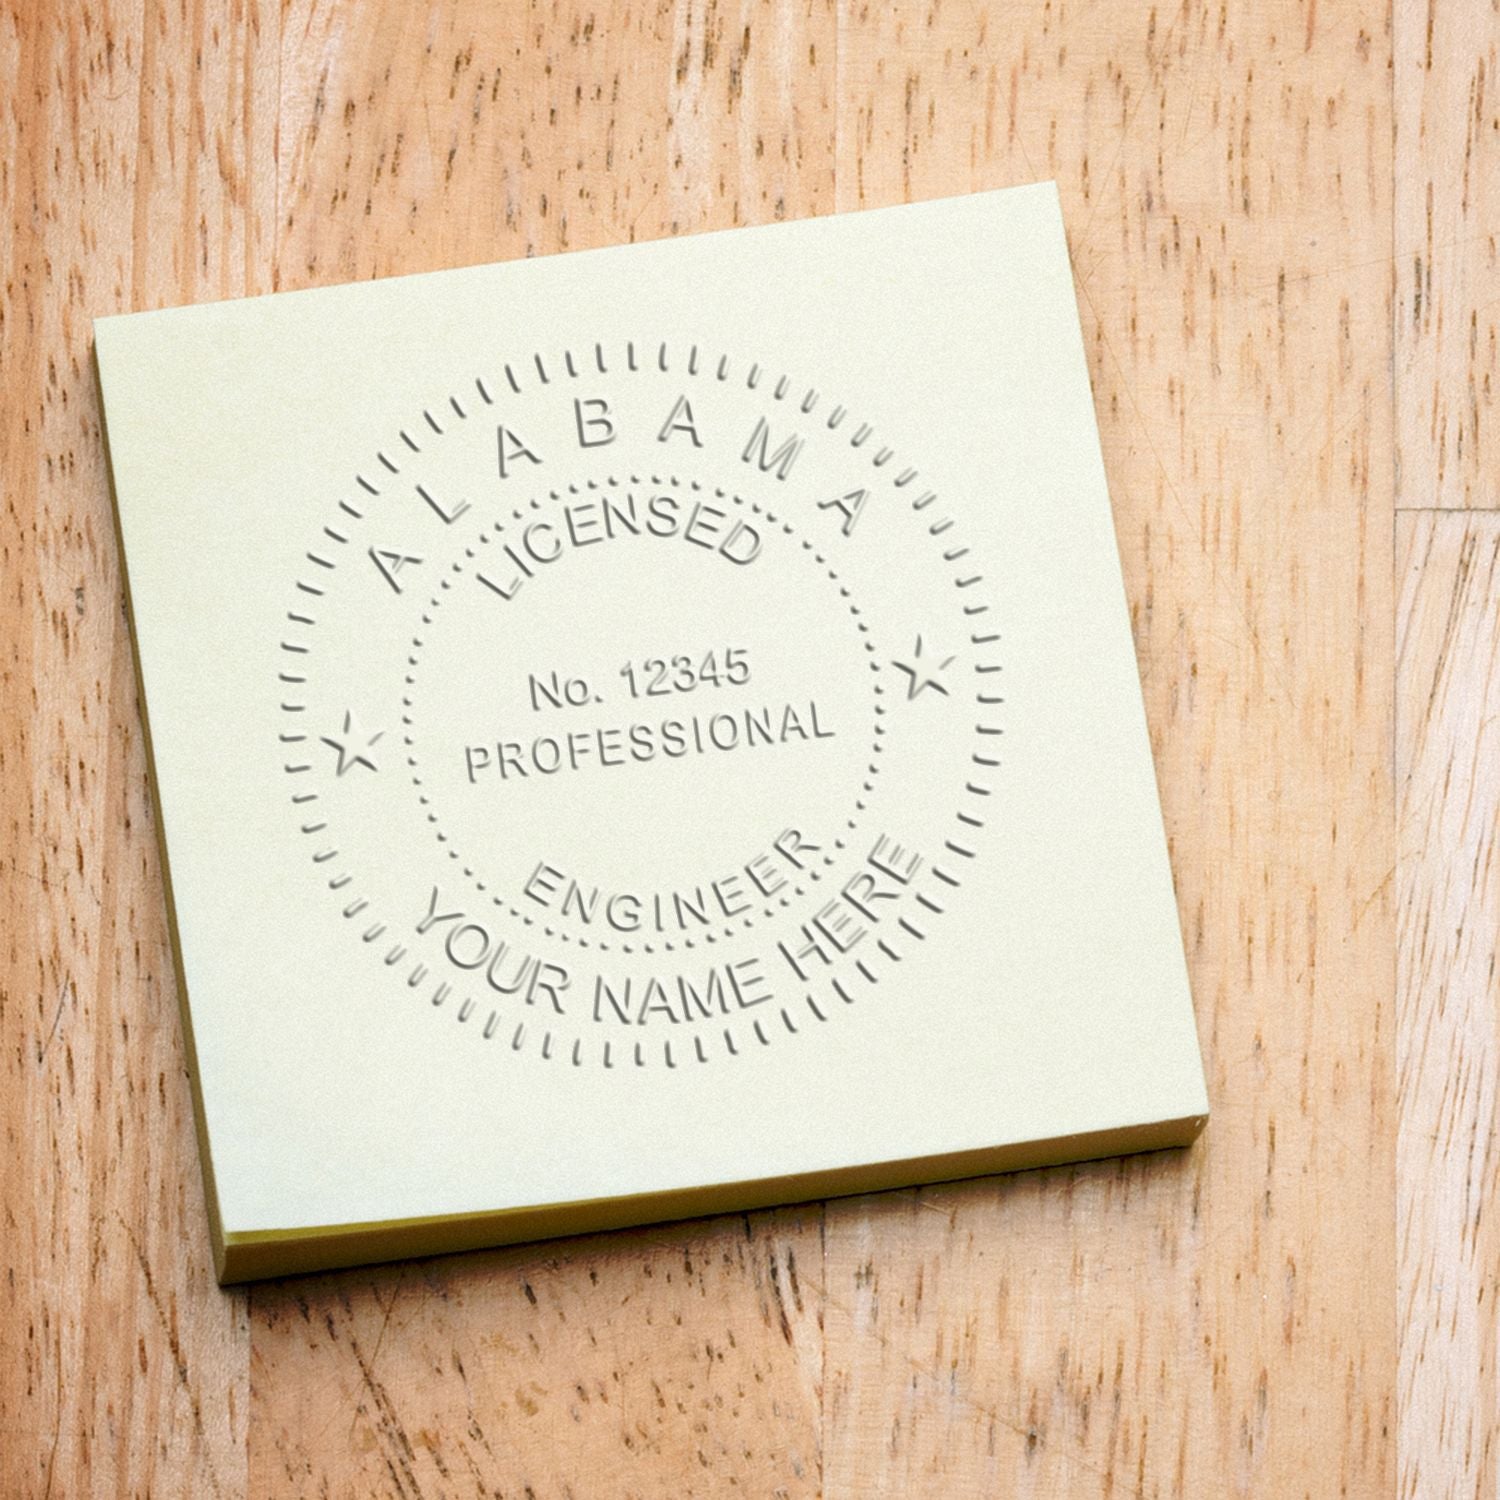 An in use photo of the Gift Alabama Engineer Seal showing a sample imprint on a cardstock